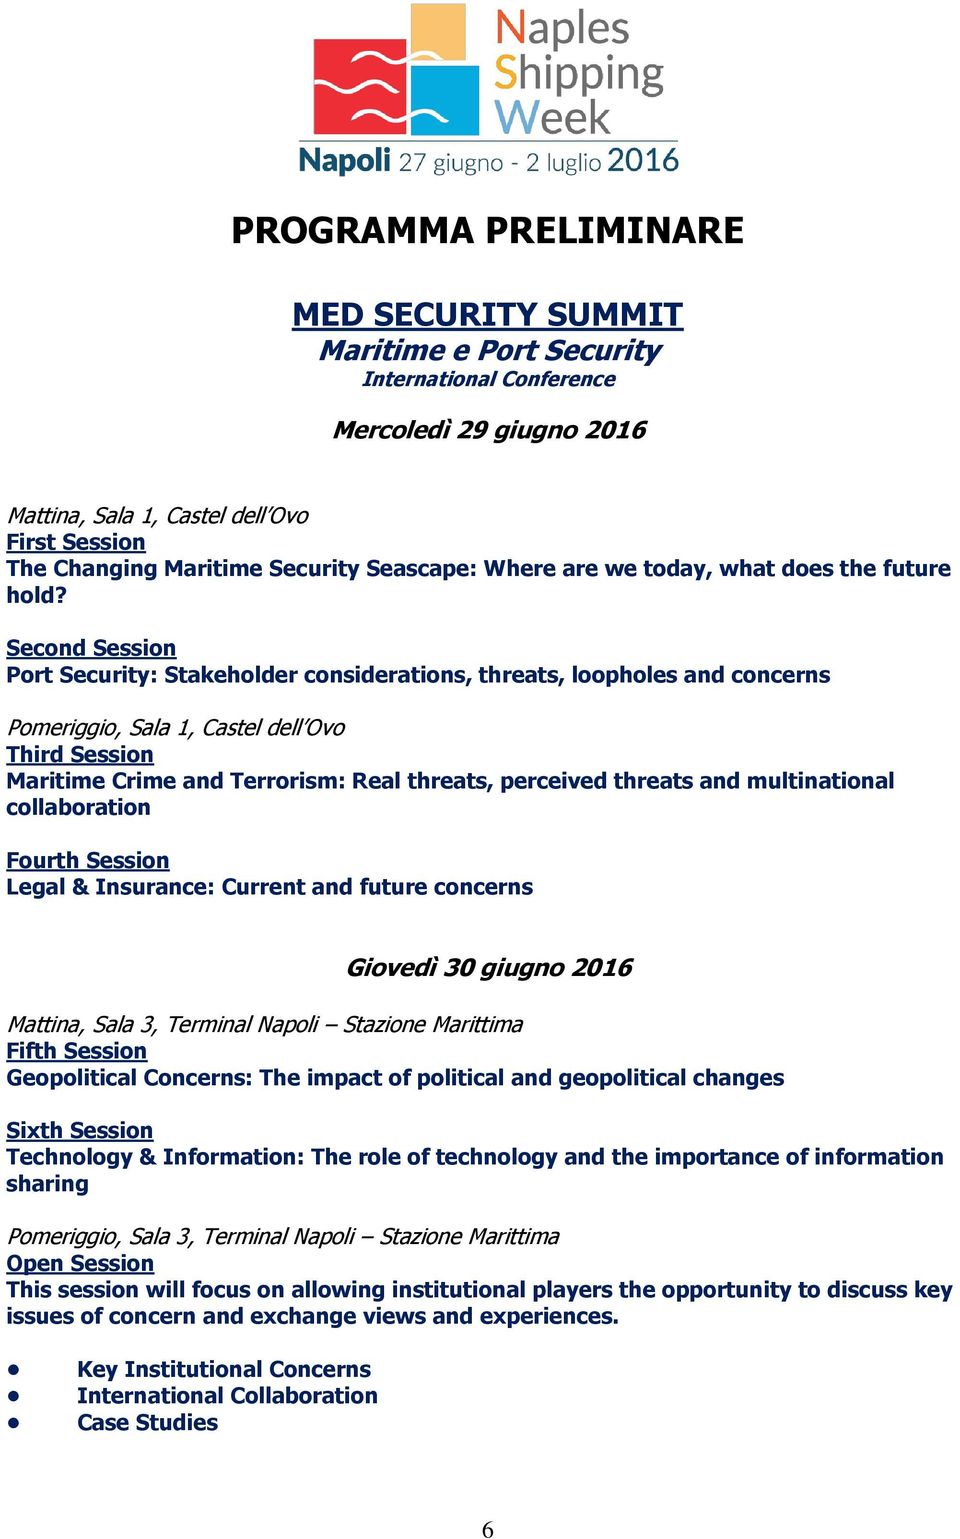 Second Session Port Security: Stakeholder considerations, threats, loopholes and concerns Pomeriggio, Sala 1, Castel dell Ovo Third Session Maritime Crime and Terrorism: Real threats, perceived